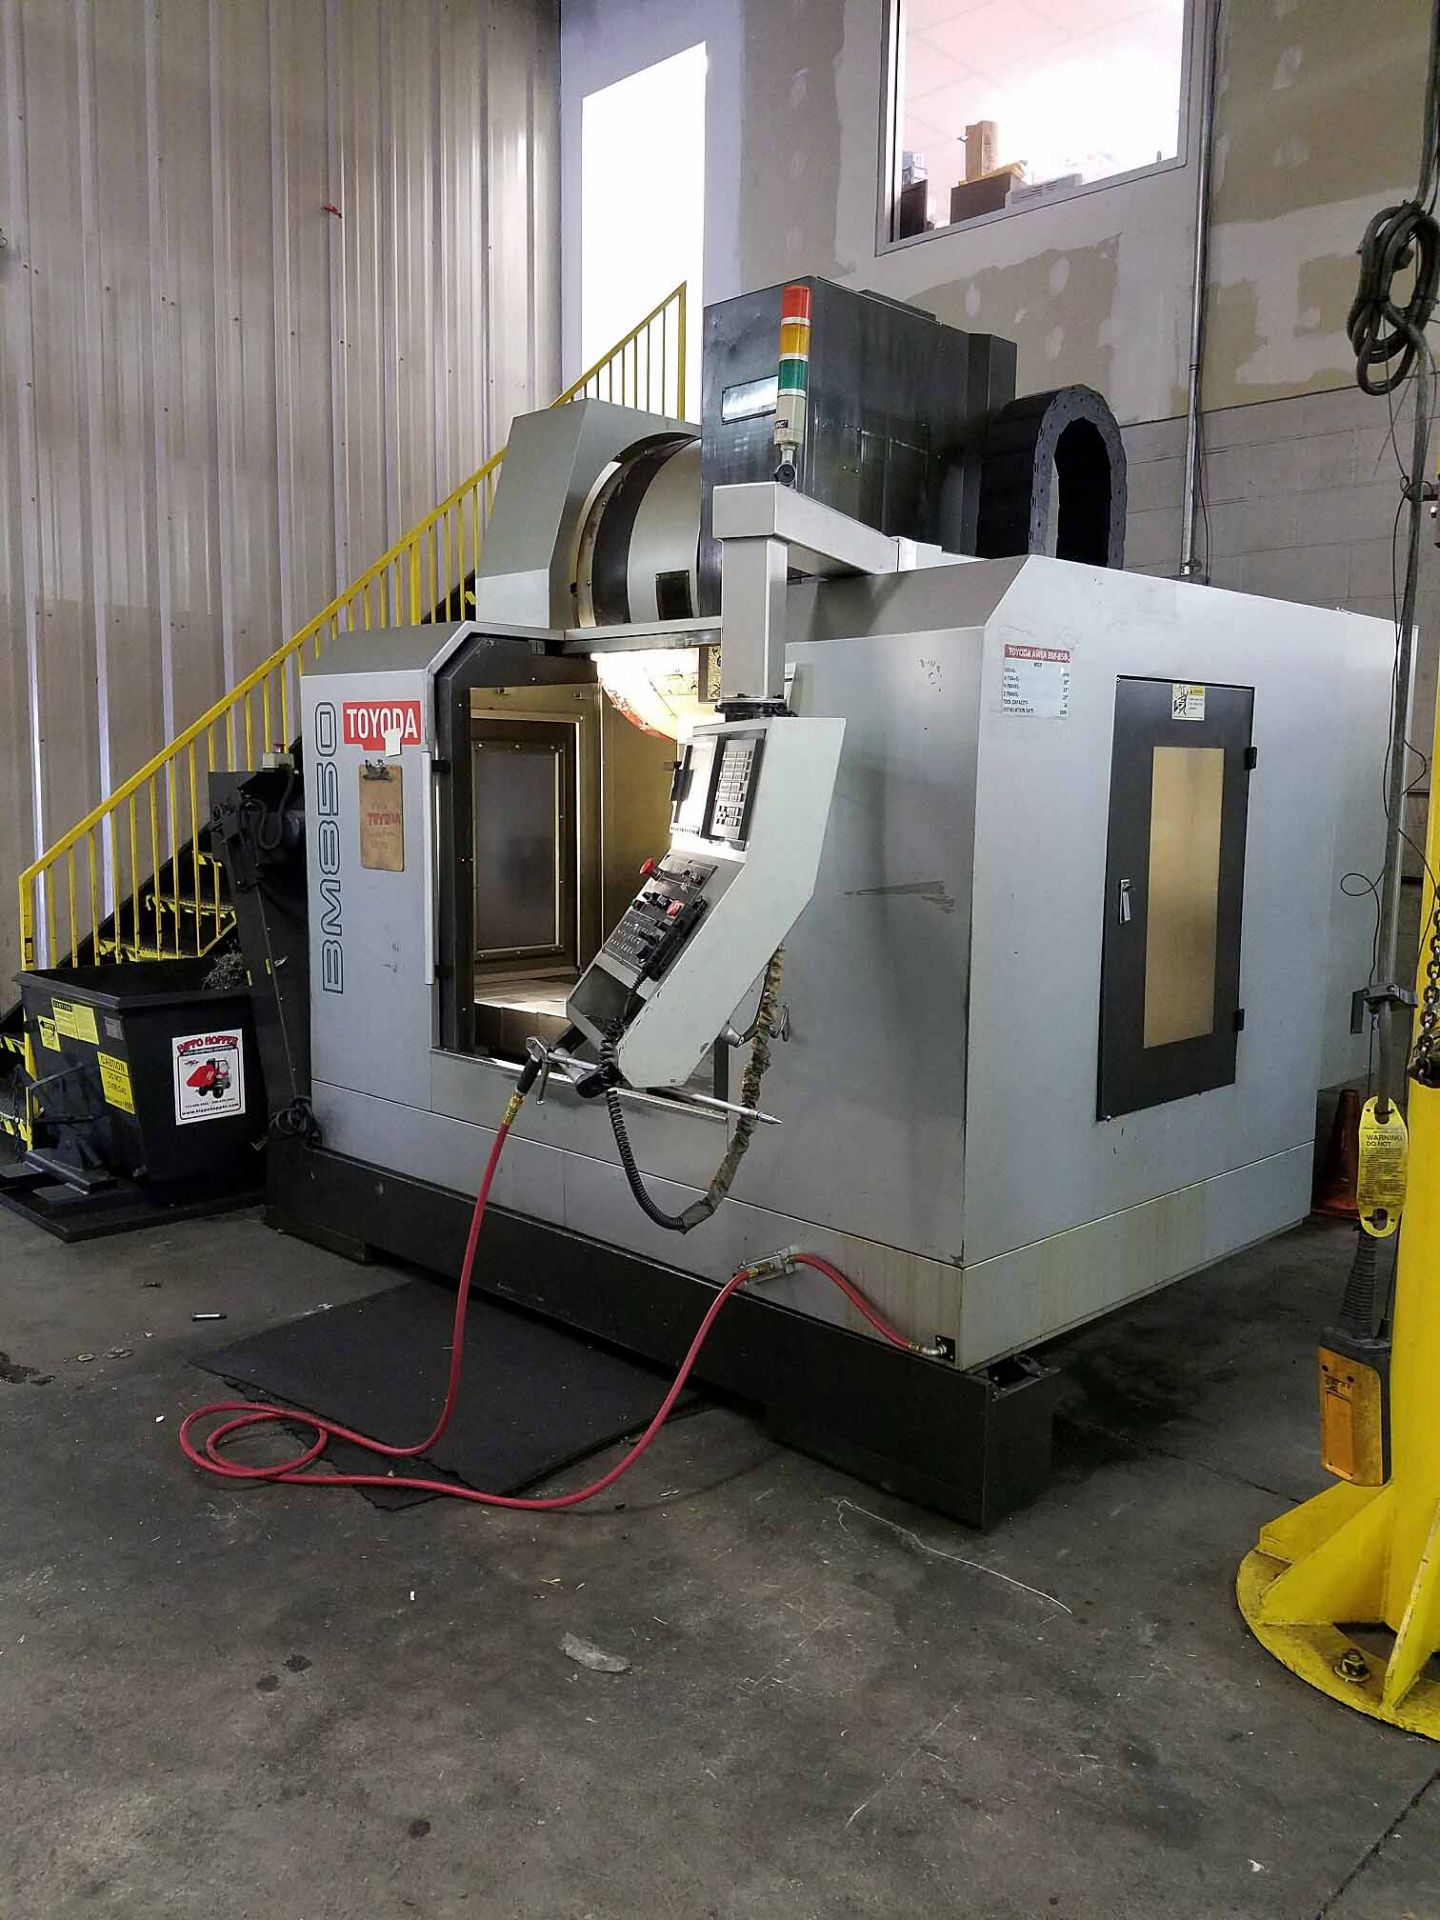 VERTICAL MACHINING CENTER, TOYODA AWEA MDL. BM-850, new 2006, Fanuc Series 18i-MB CNC control, 33" - Image 9 of 13